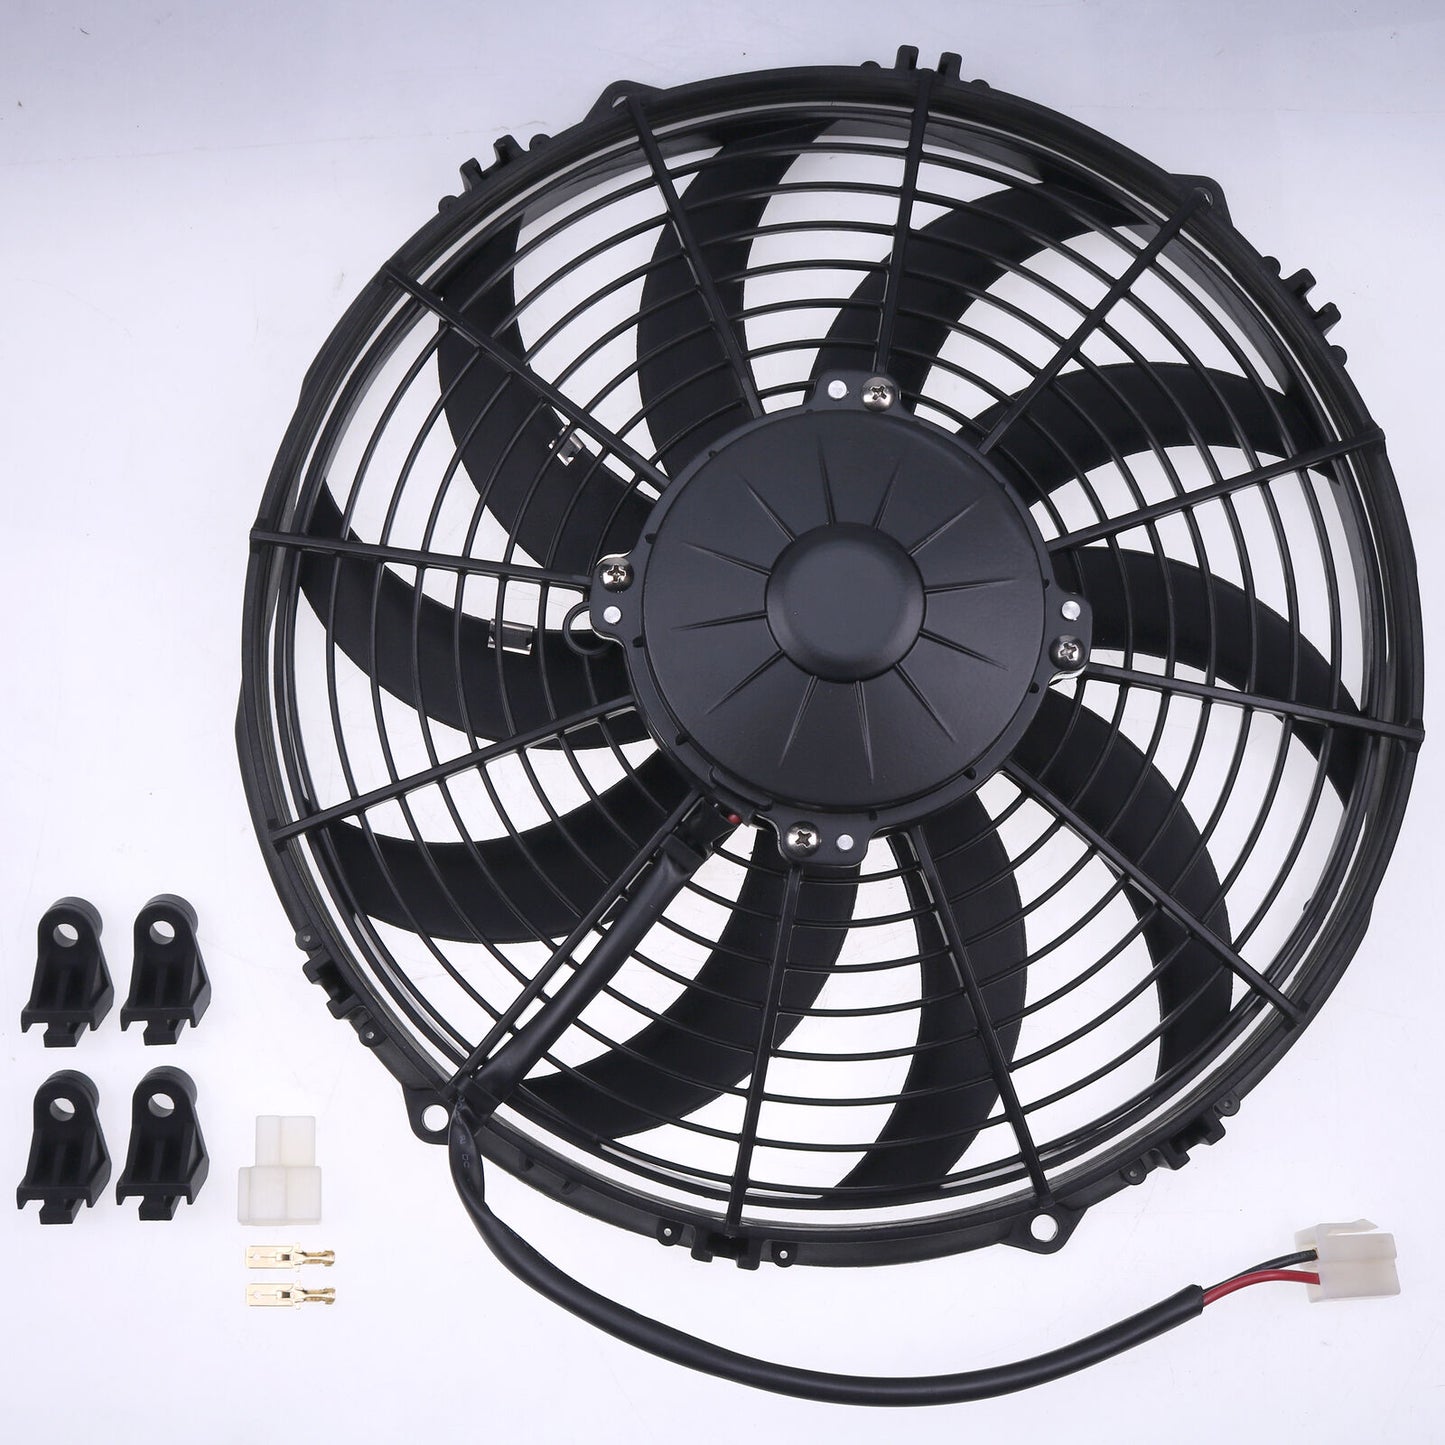 VA10-BP50/C-61A Fan Curved 305mm Diameter 24V Compatible with Spal